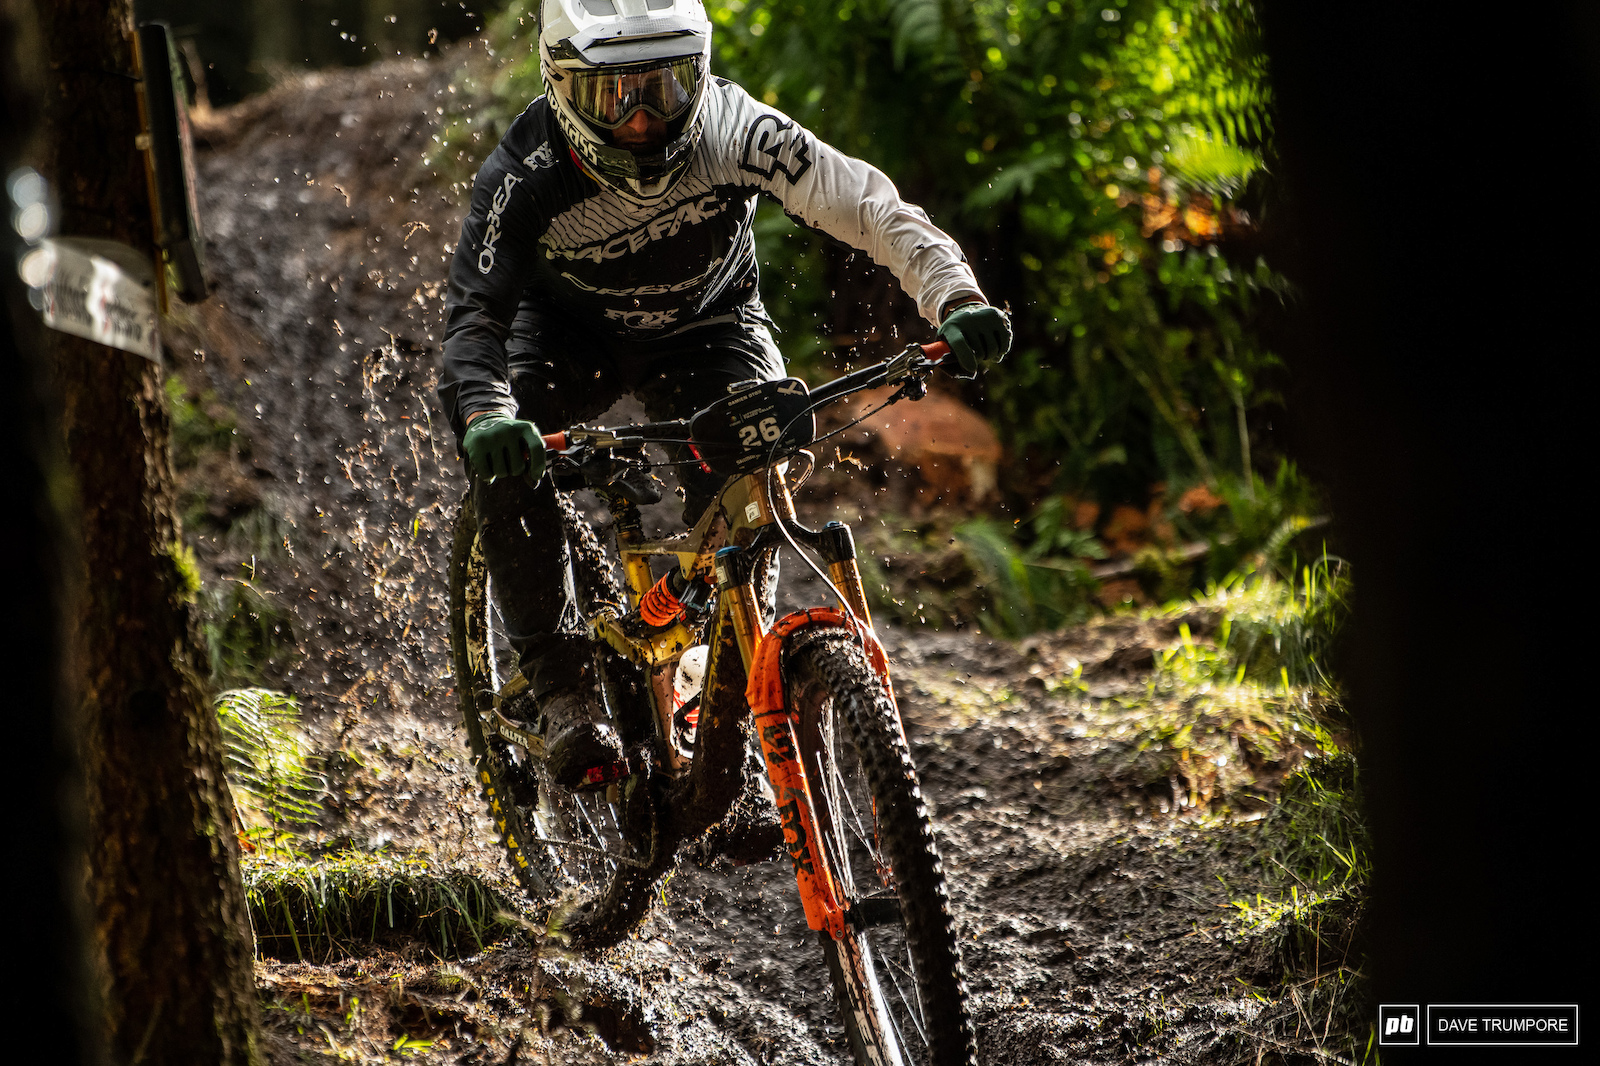 Damion Oton in his final EWS race of what has been an incredible career